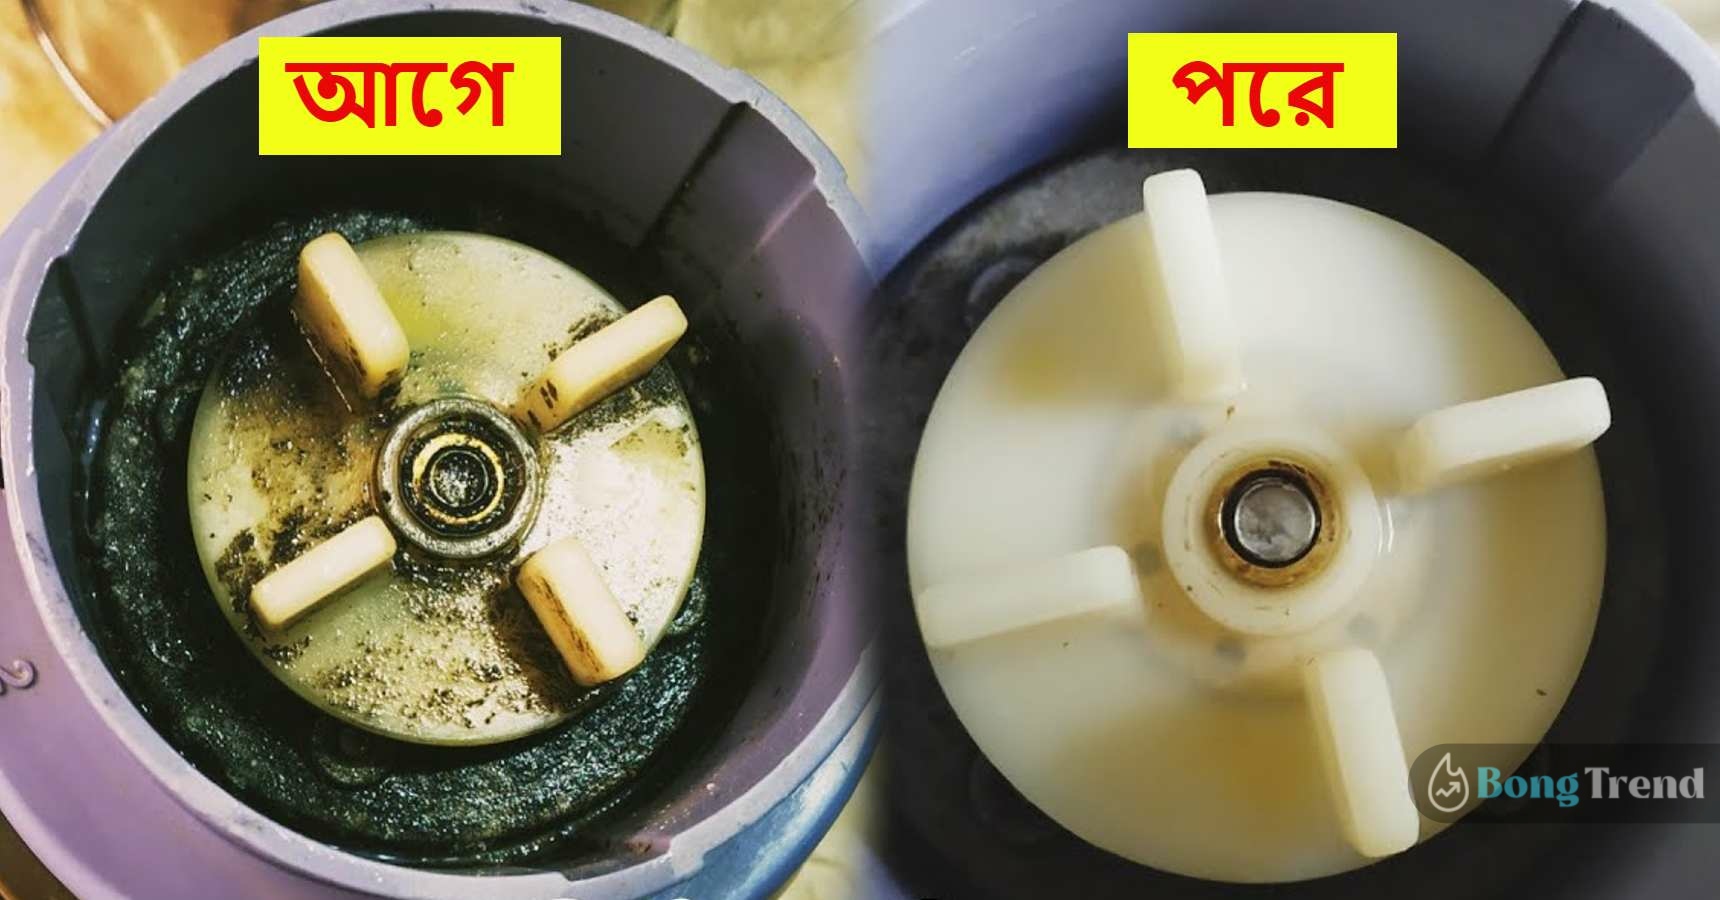 How to clean dirty mixi at home